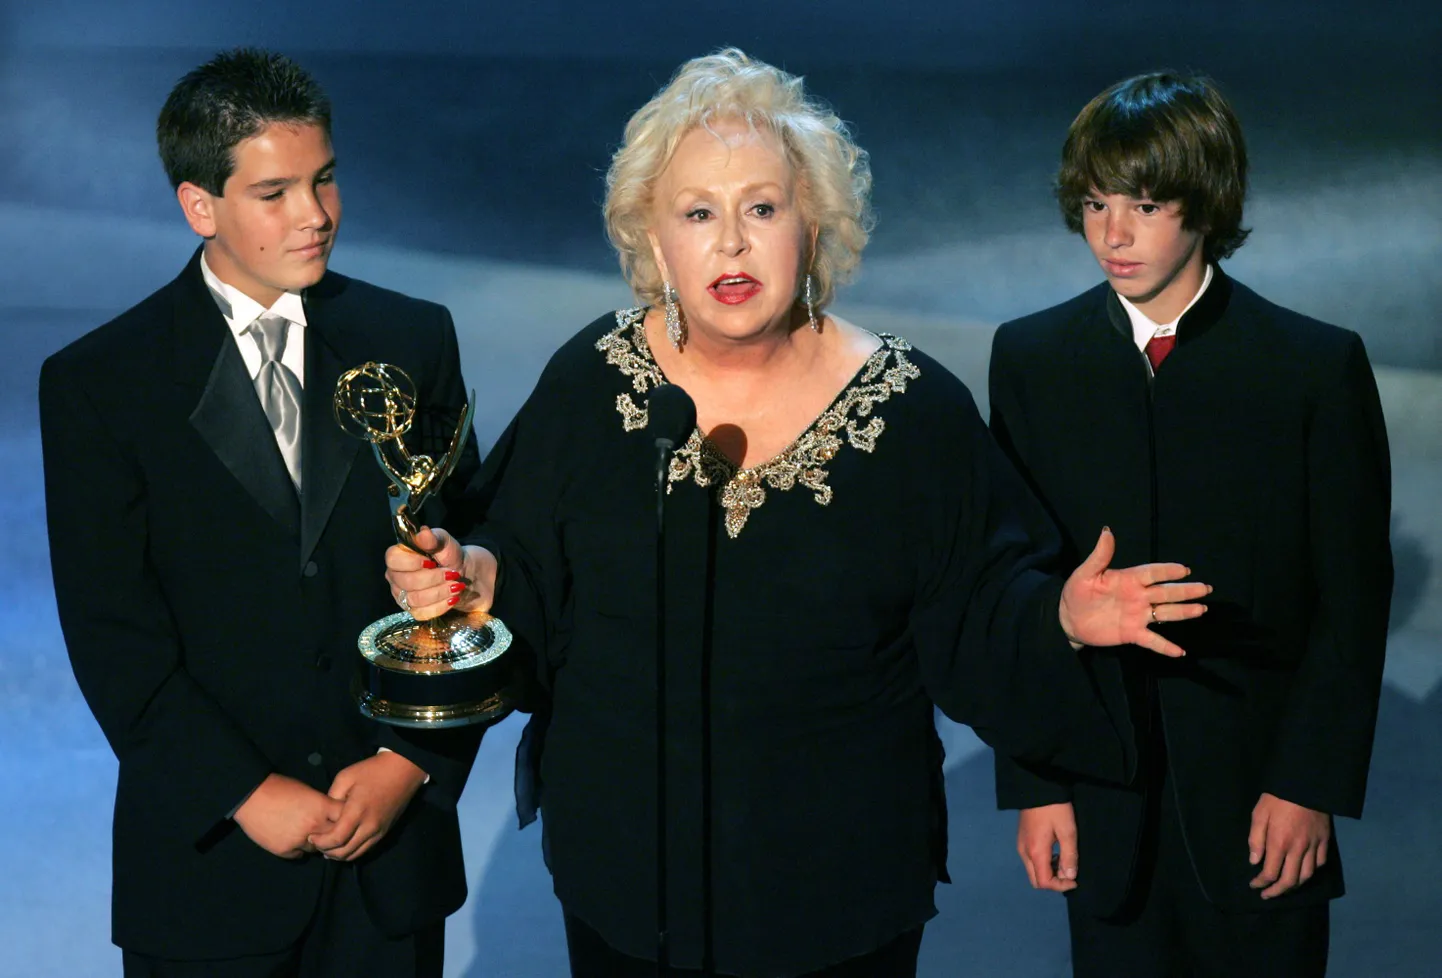 Doris Roberts accepts her award for Outstanding Supporting Actress in a Comedy Series, with her grandsons, at the 57th annual Primetime Emmy Awards at the Shrine Auditorium in Los Angeles, September 18, 2005. The co-star of the hit comedy television series "Everybody Loves Raymond" died April 17, 2016 according to local media, Monday. REUTERS/Robert Galbraith/File photo